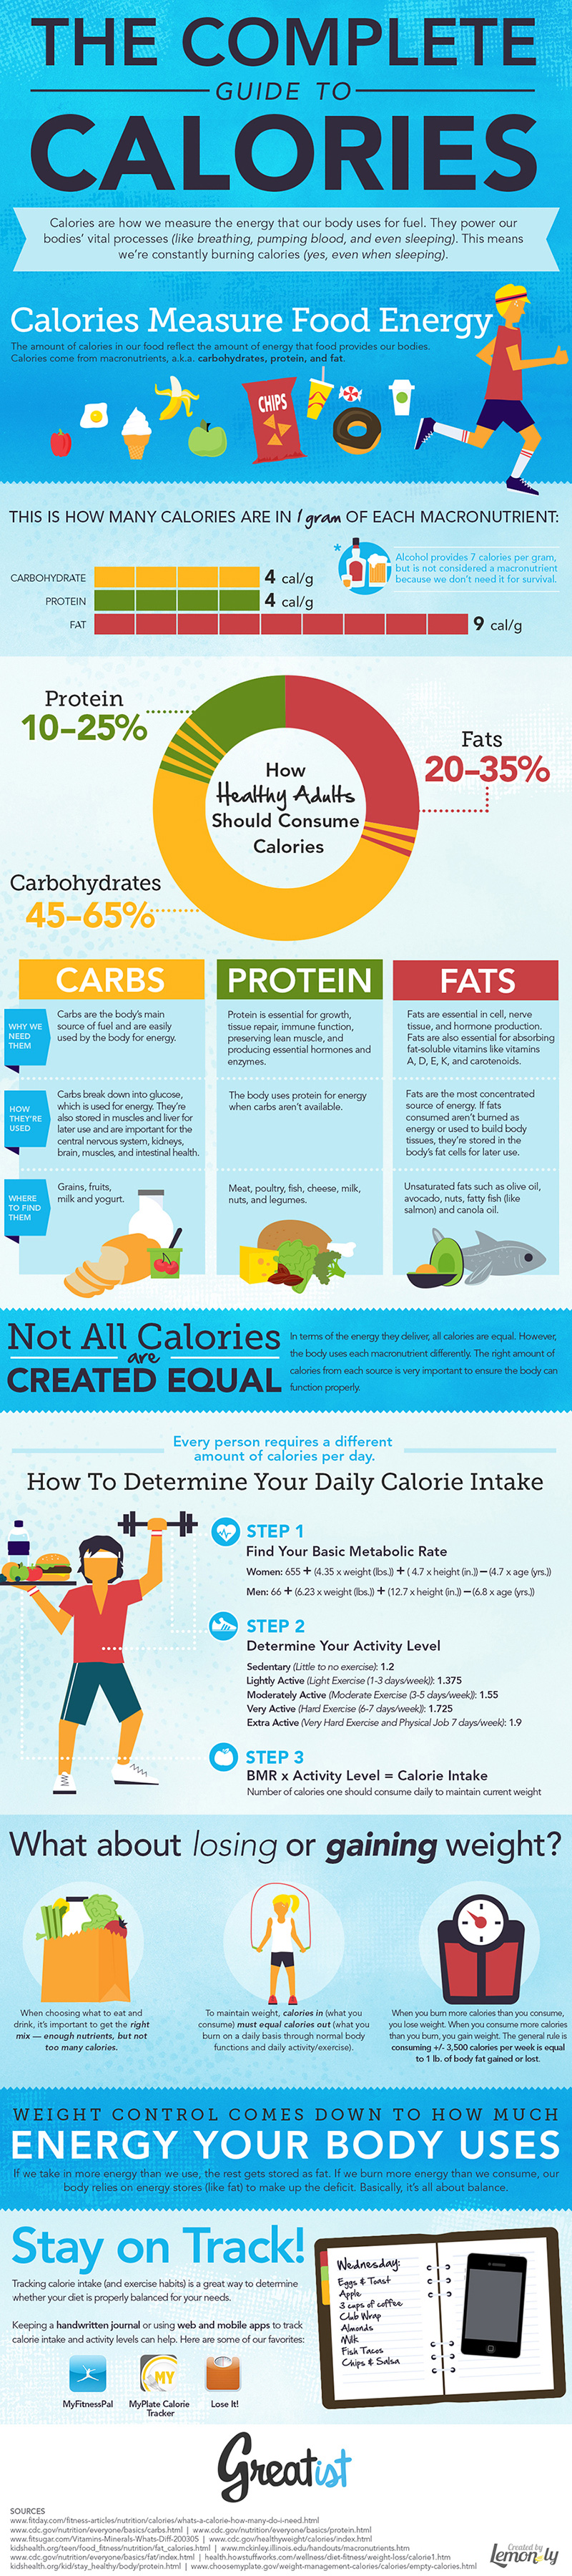 The Complete Guide To Calories